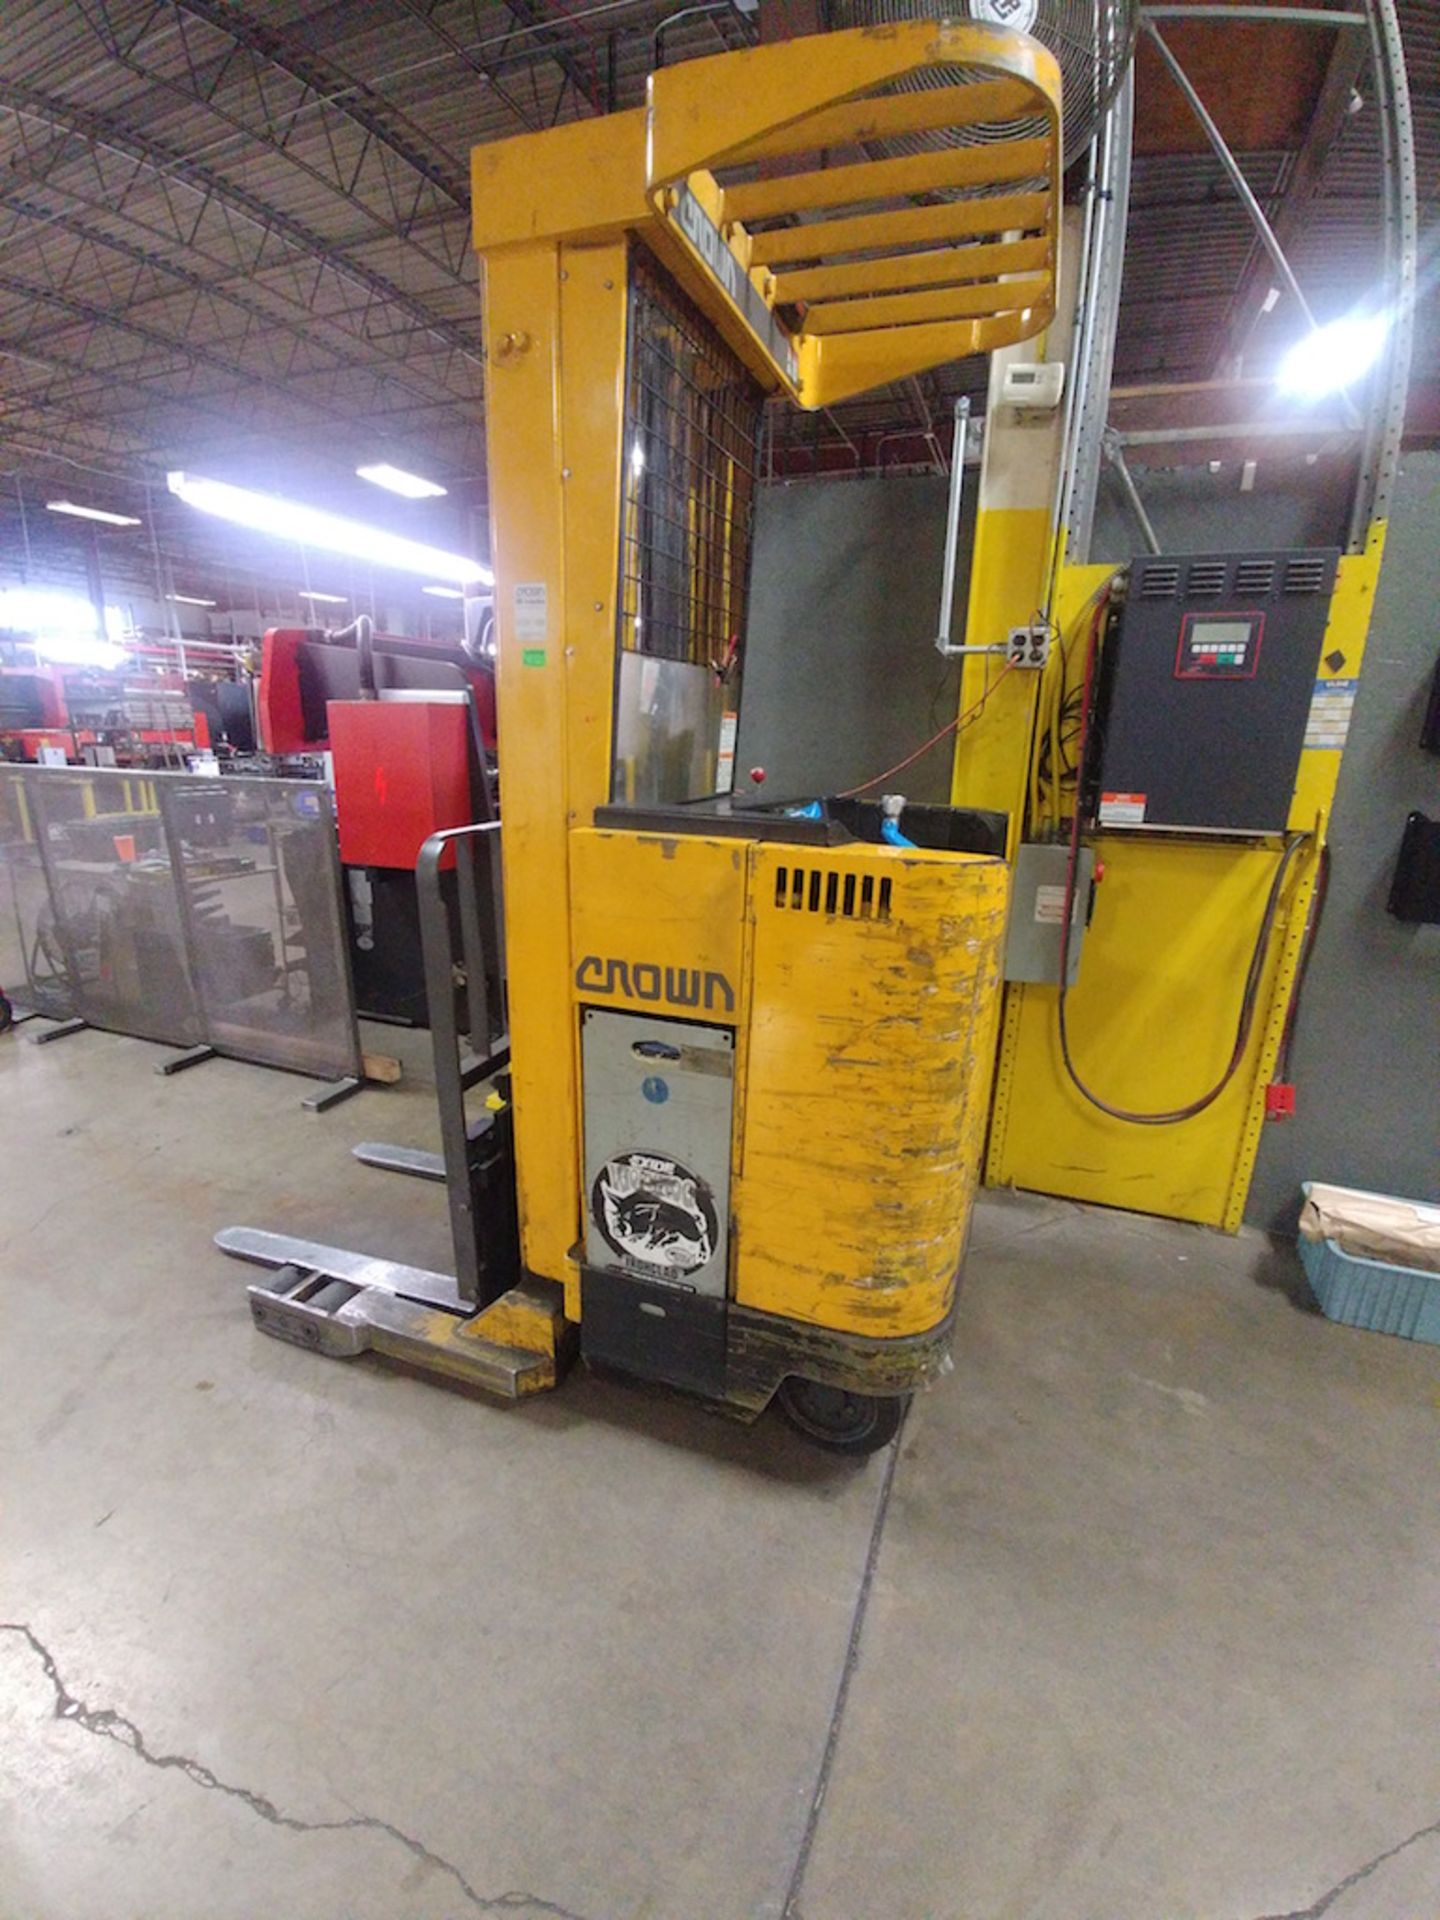 CROWN 3500LB. CAP. MODEL 35RRTH ELECTRIC NARROW AISLE STACKER: S/N W-33059 (LOCATION - LOMBARD, IL) - Image 2 of 4